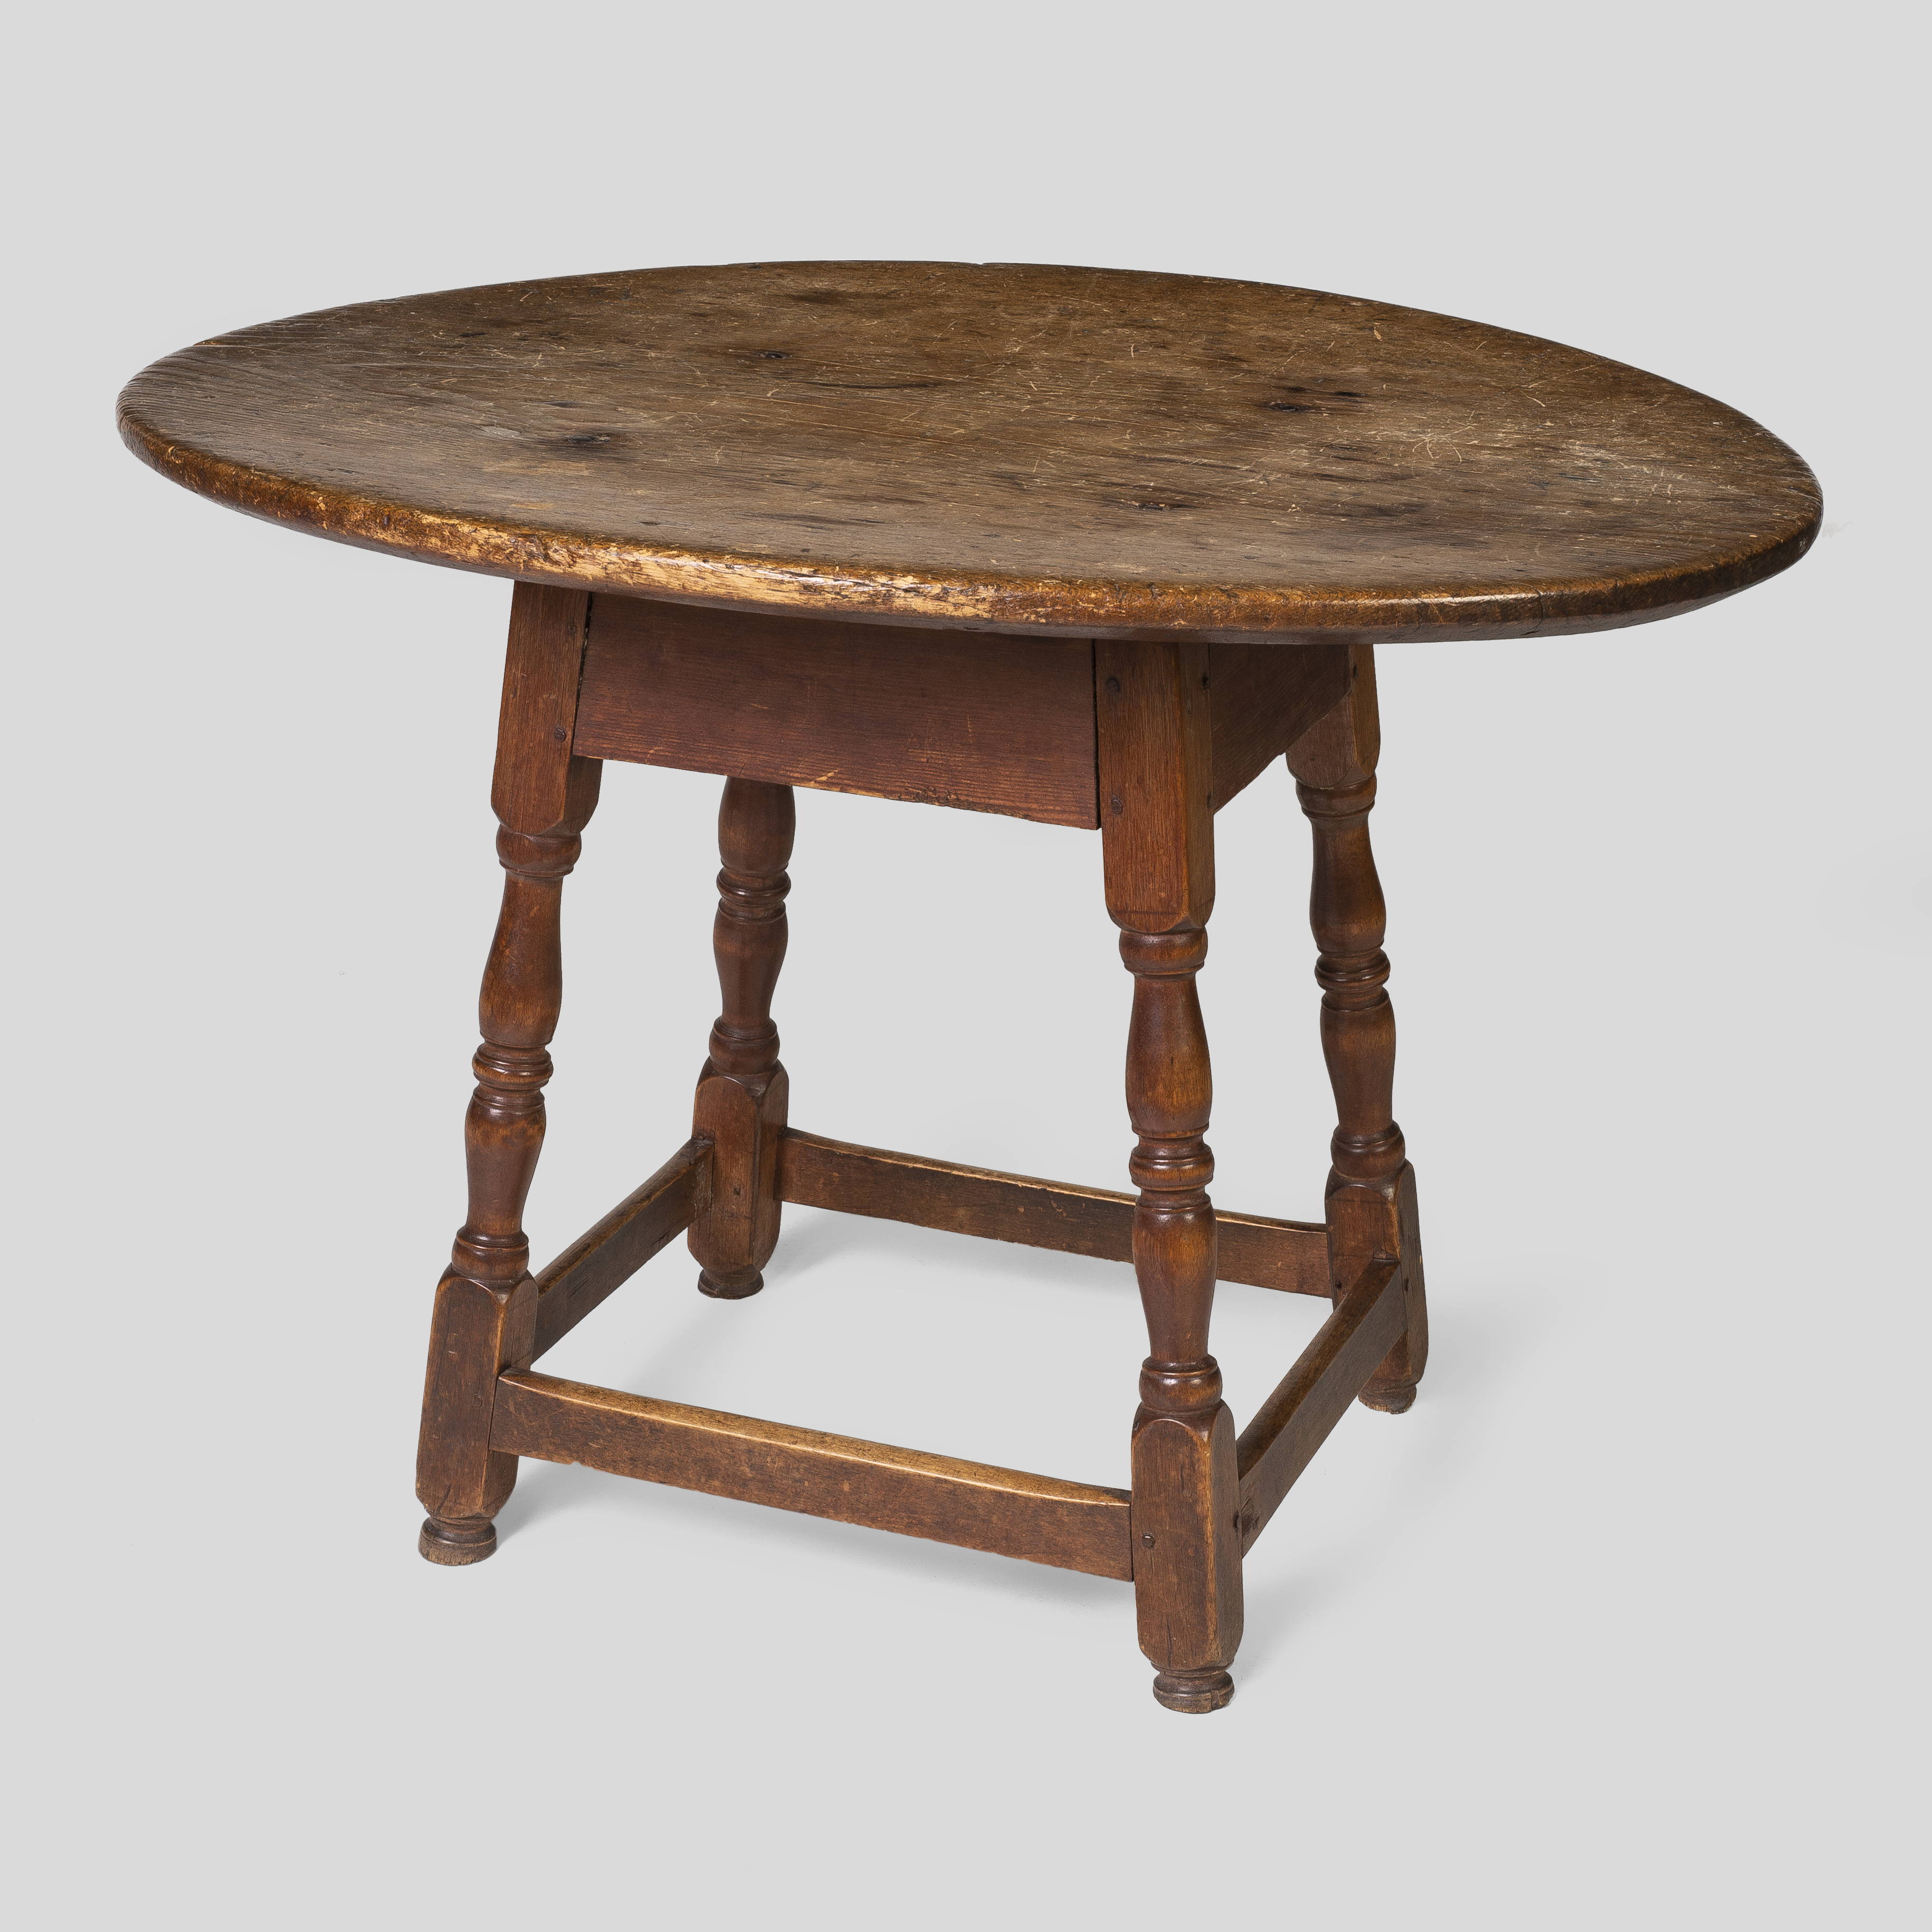 An early William and Mary tavern table